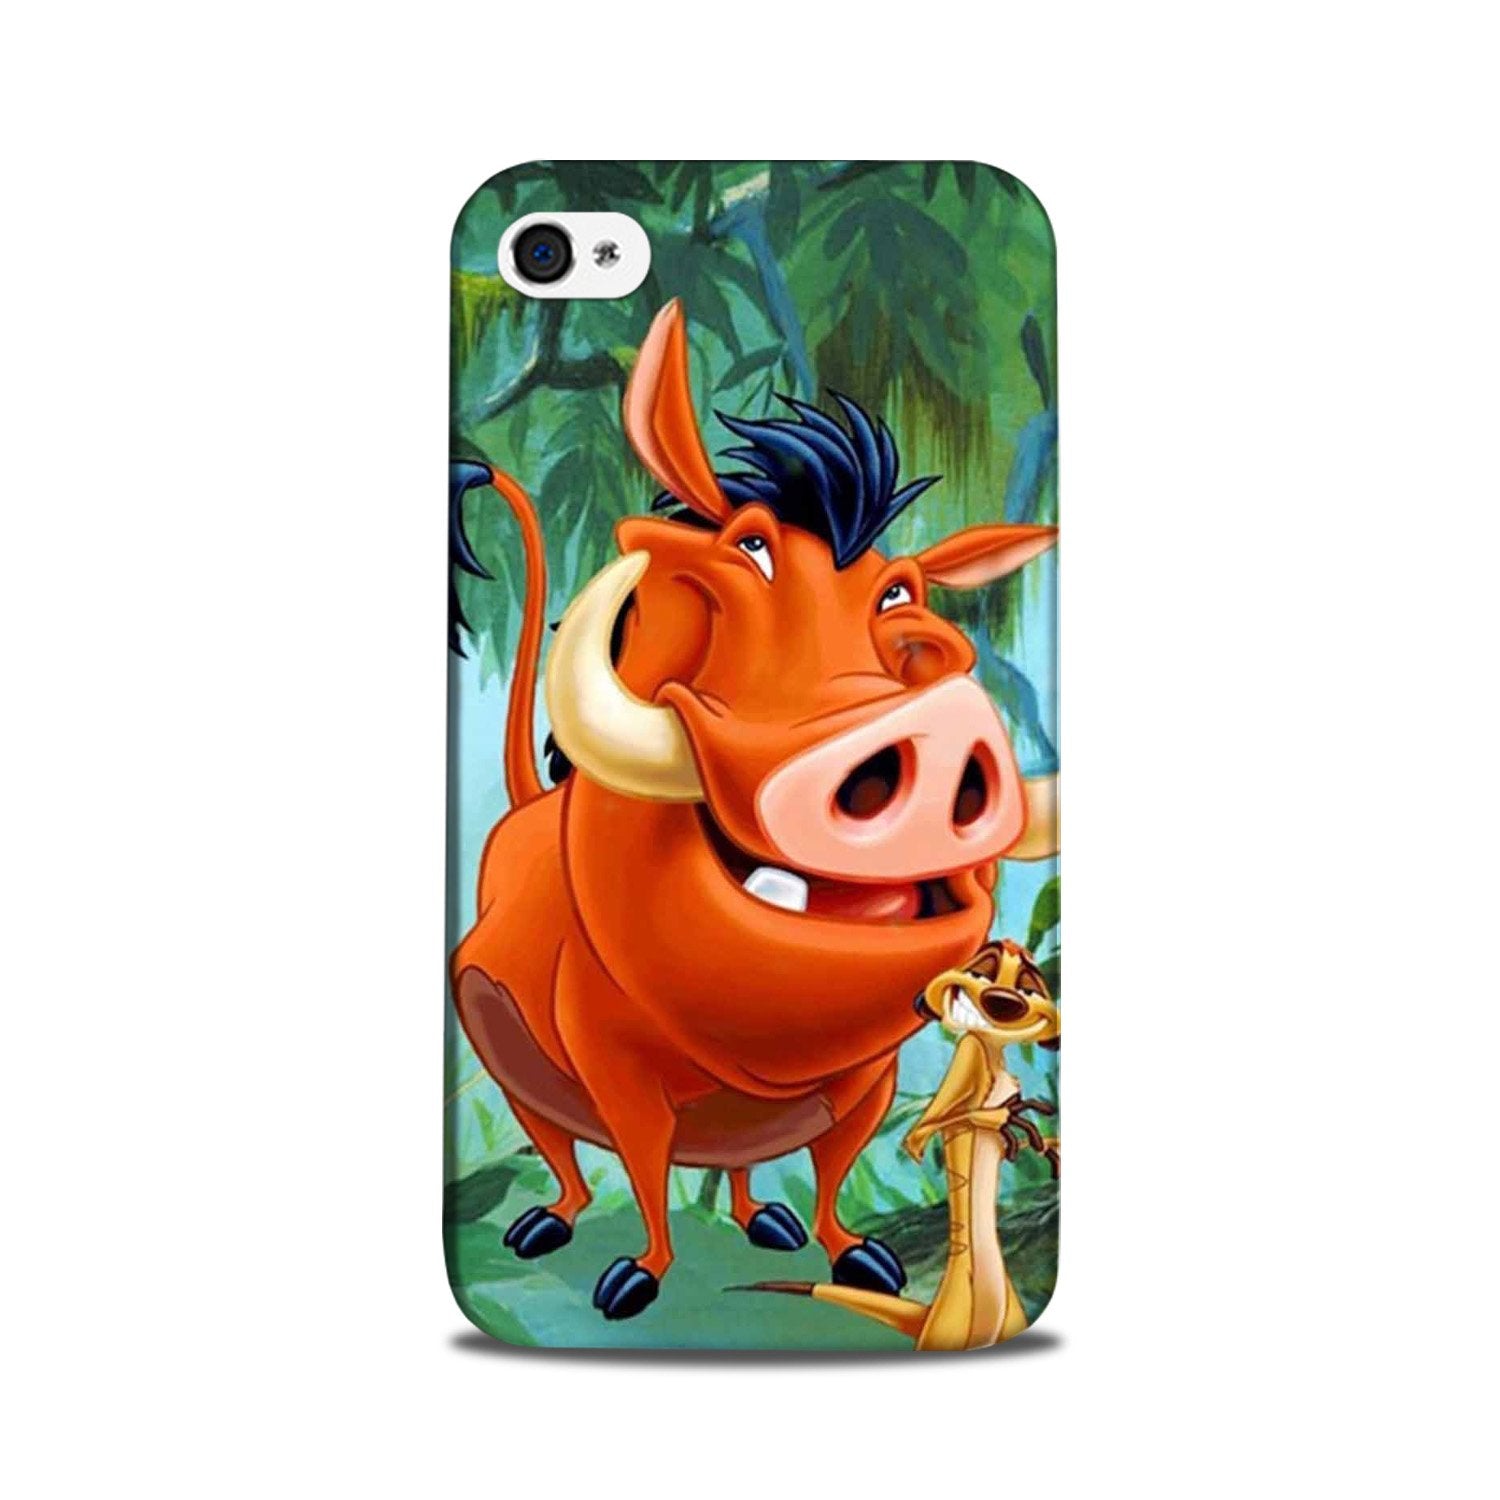 Timon and Pumbaa Mobile Back Case for iPhone 5/ 5s  (Design - 305)